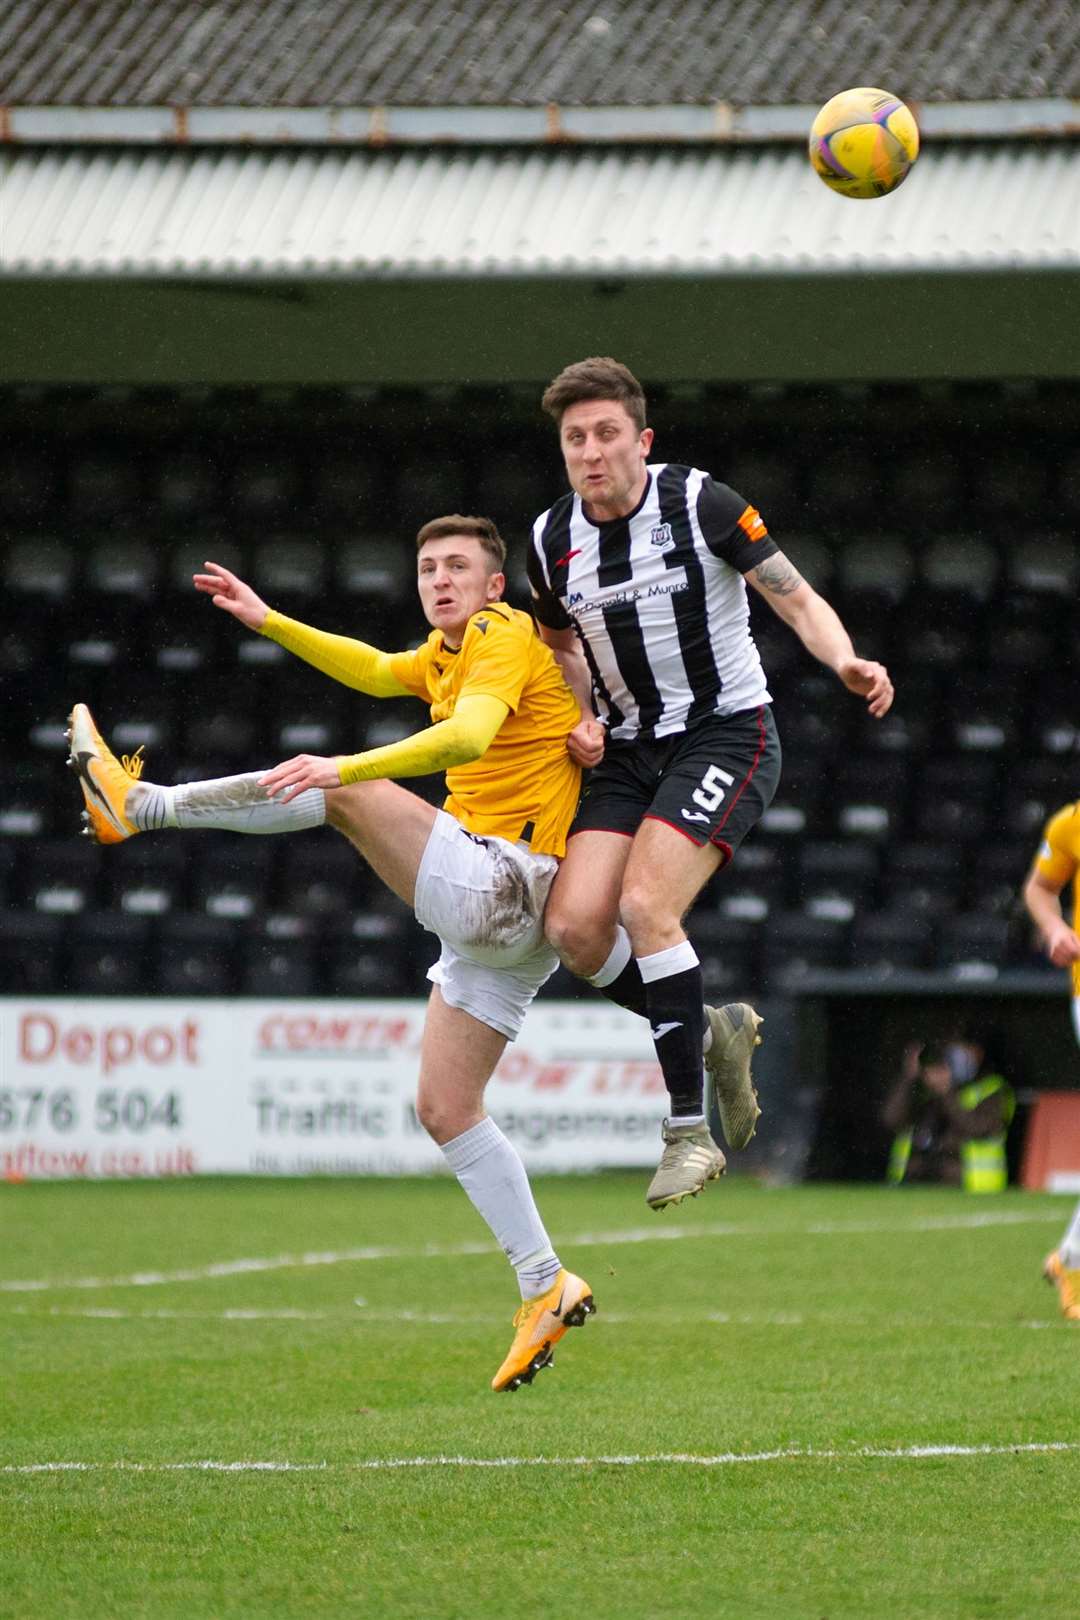 Stephen Bronsky wins a header against the club he has just joined, Edinburgh City. Picture: Daniel Forsyth..